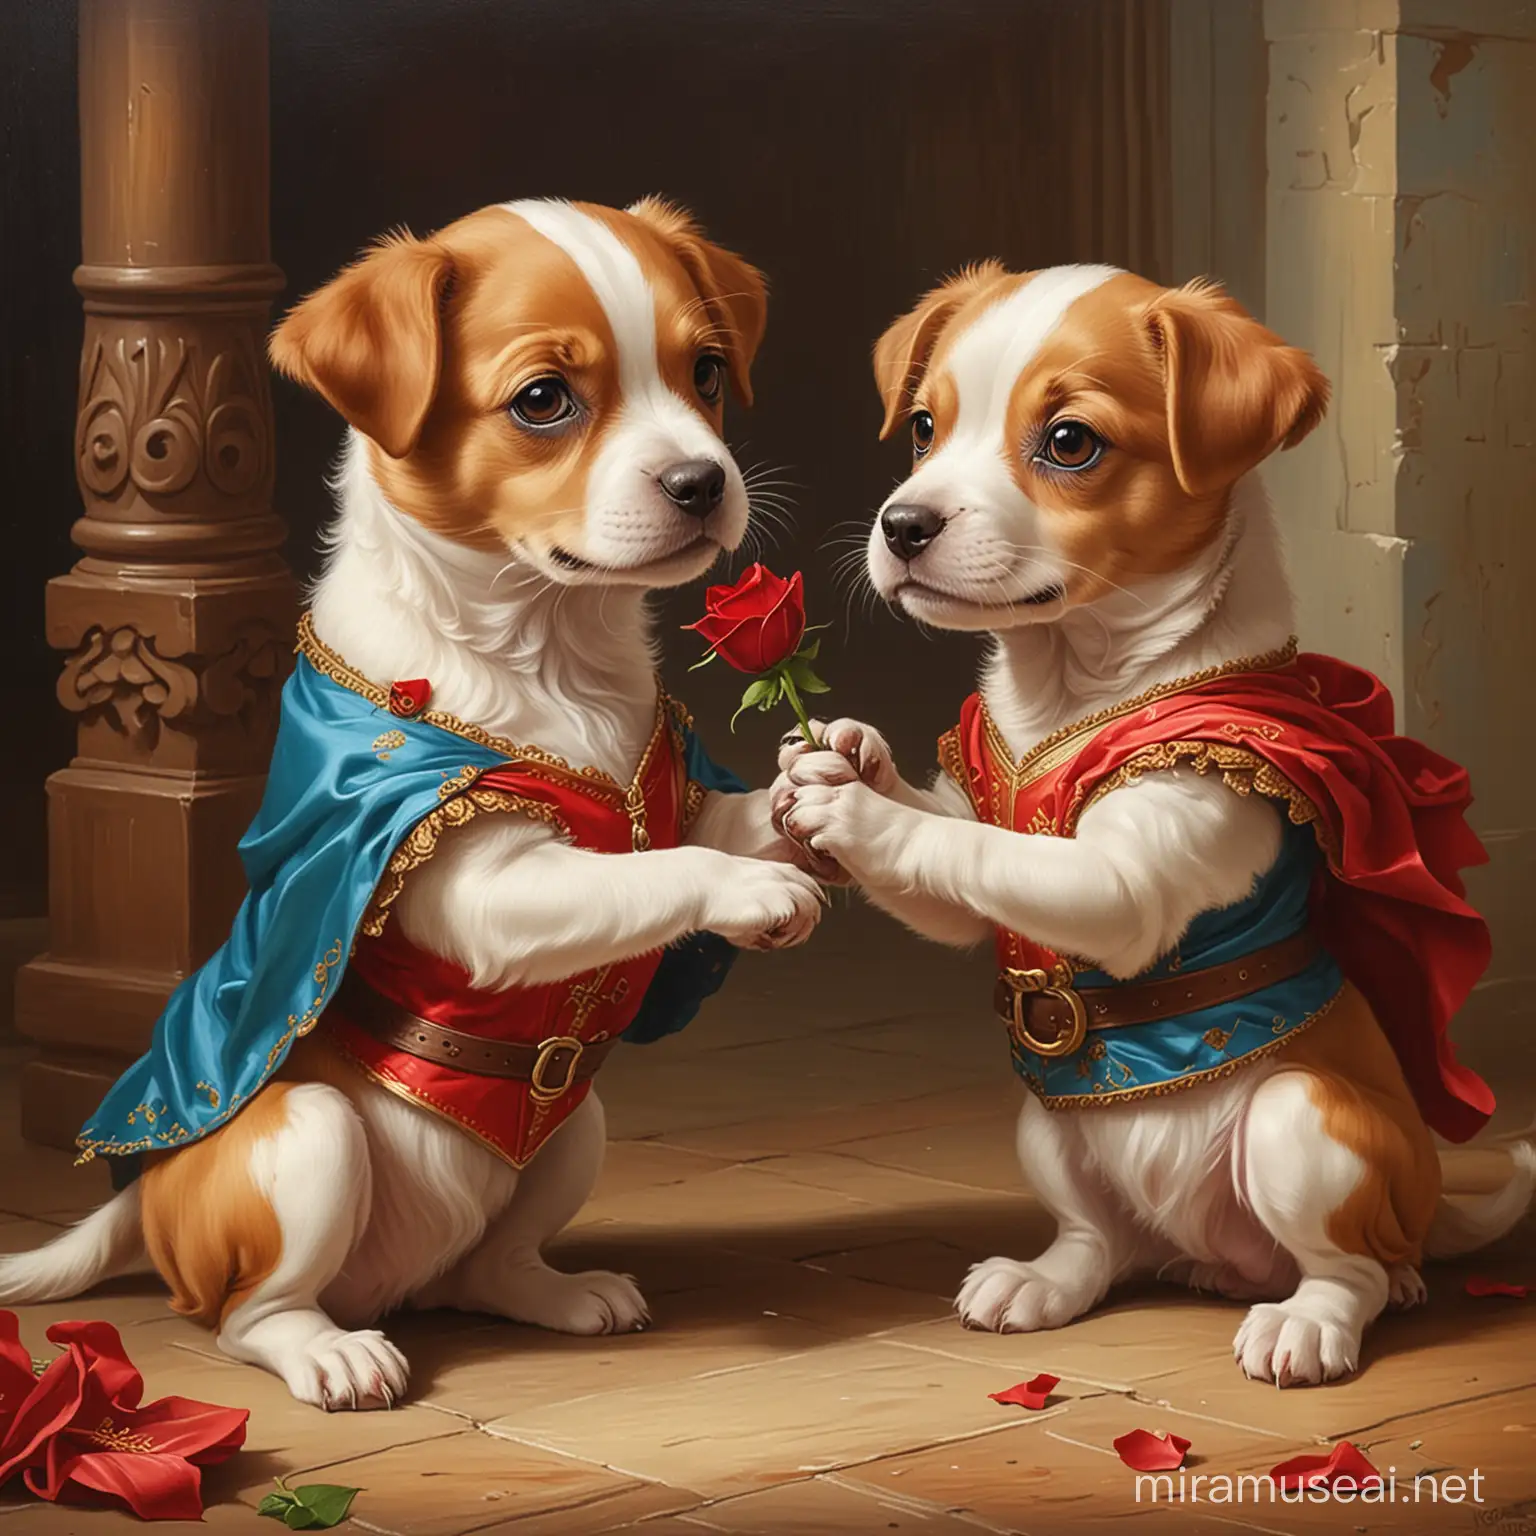 oil painting vintage cartoon puppies play the roles of Romeo and Juliet.